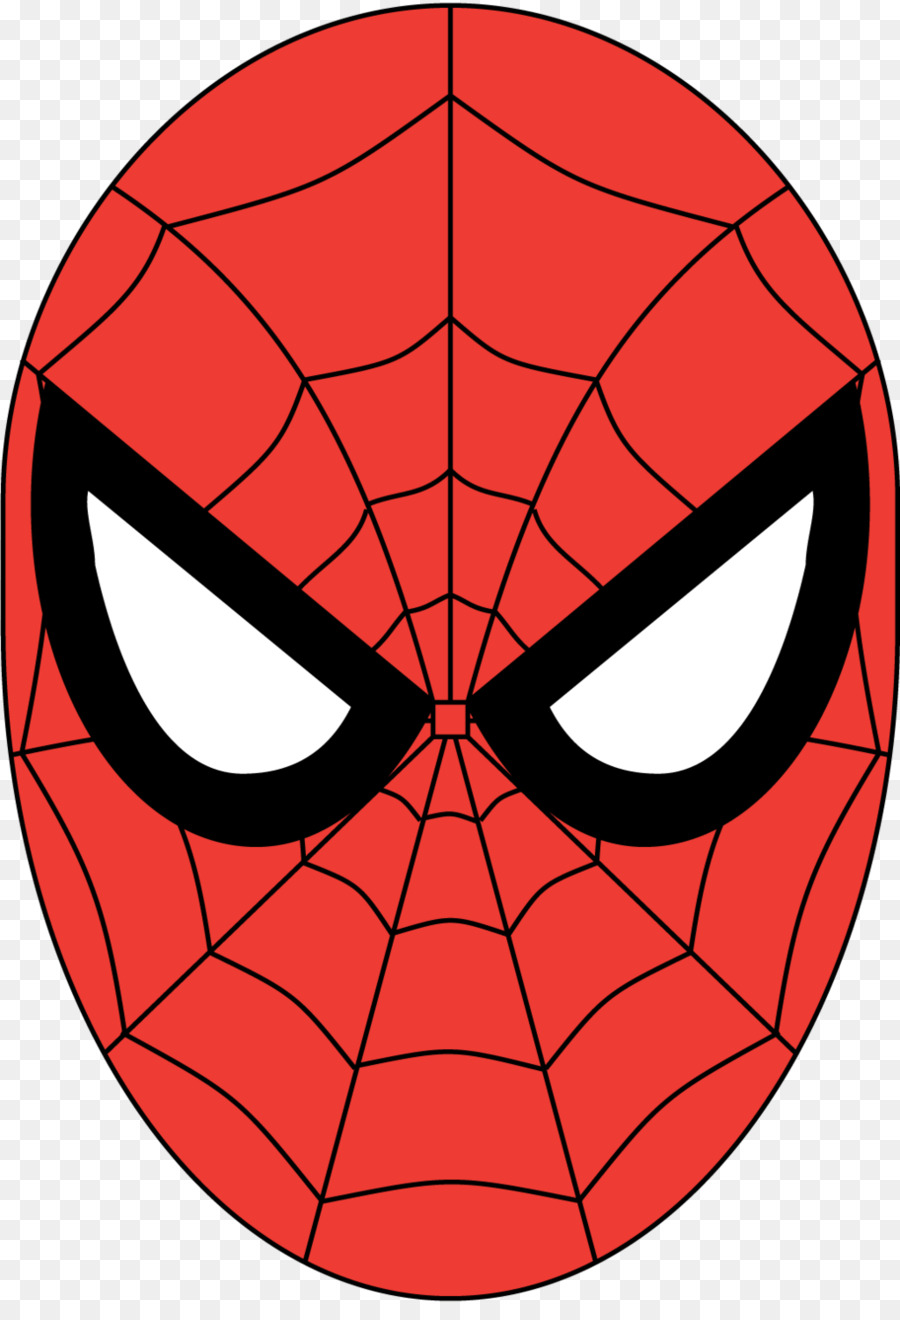 Spiderman Face clipart